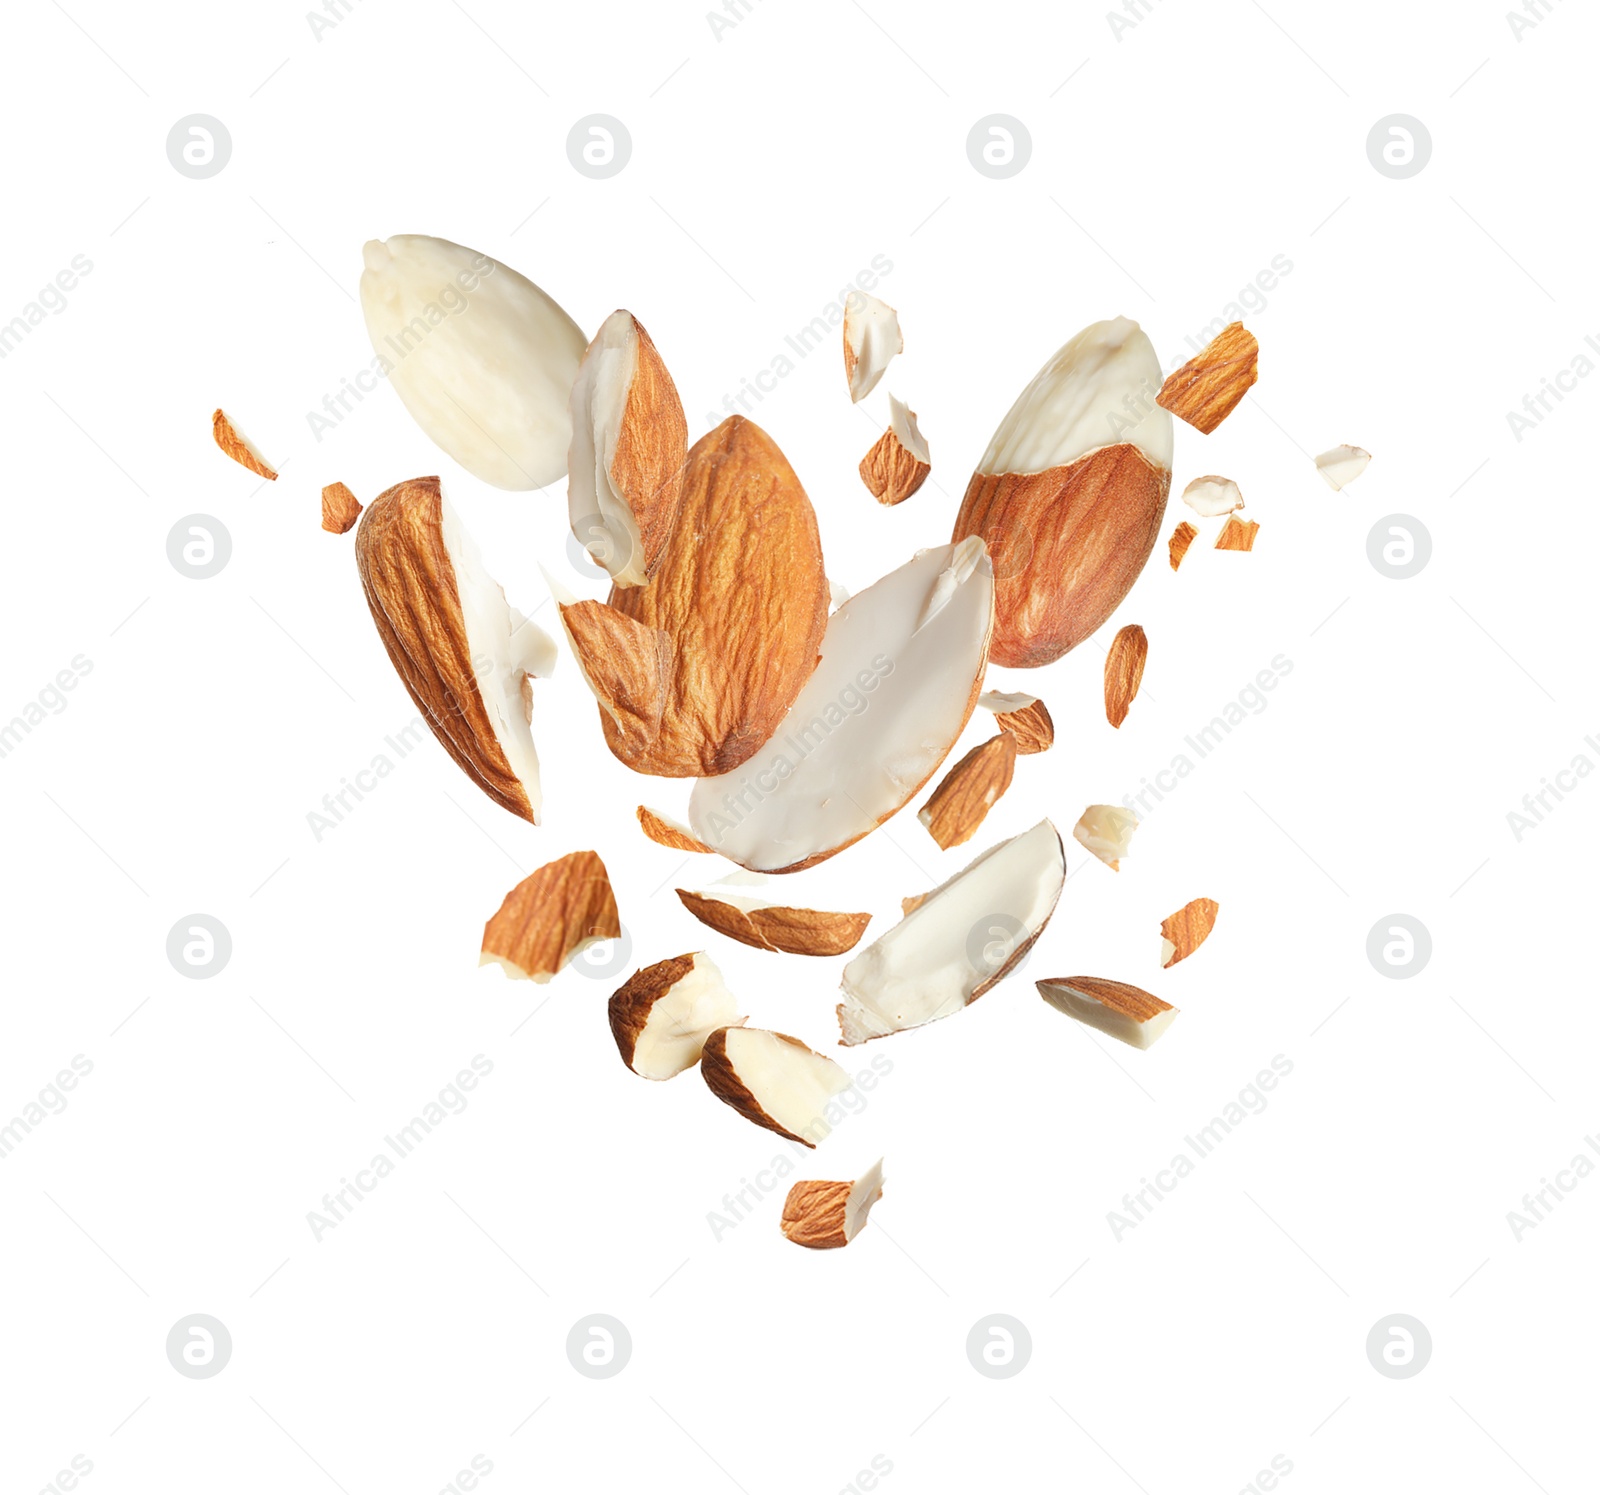 Image of Pieces of tasty almonds falling on white background